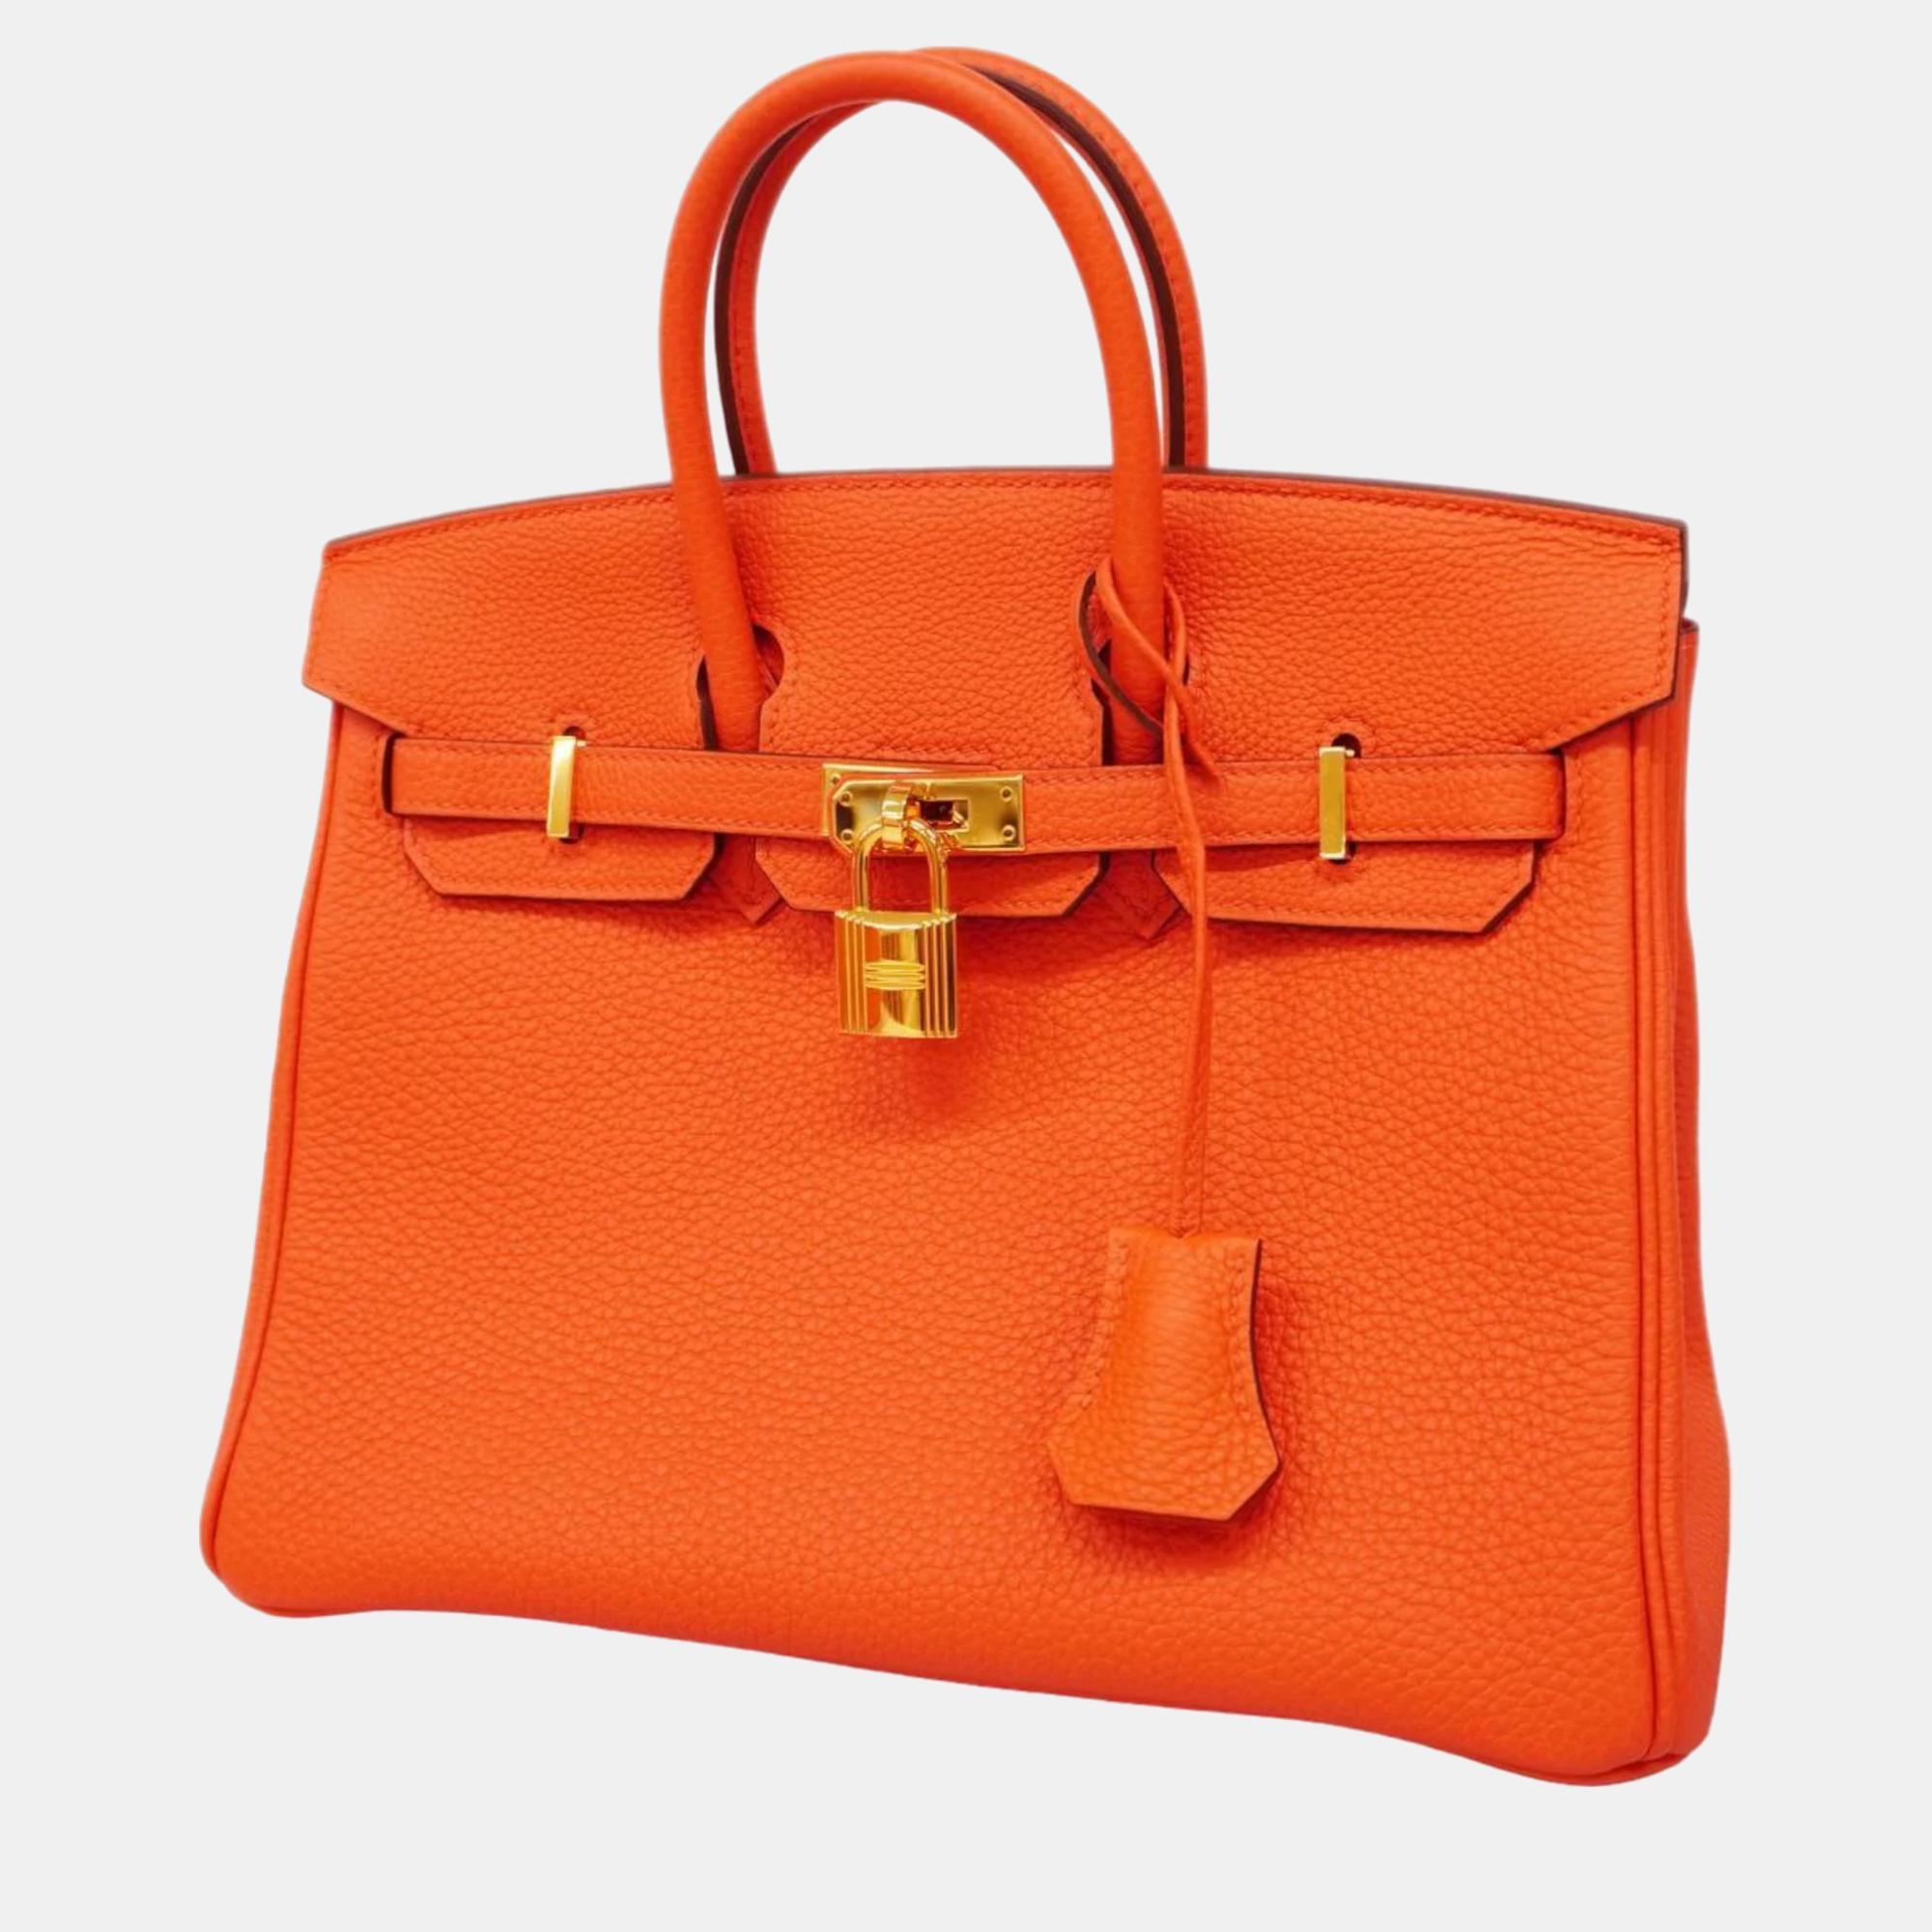 Elevate your style with this Hermes bag. Merging form and function this exquisite accessory epitomizes sophistication ensuring you stand out with elegance and practicality by your side.